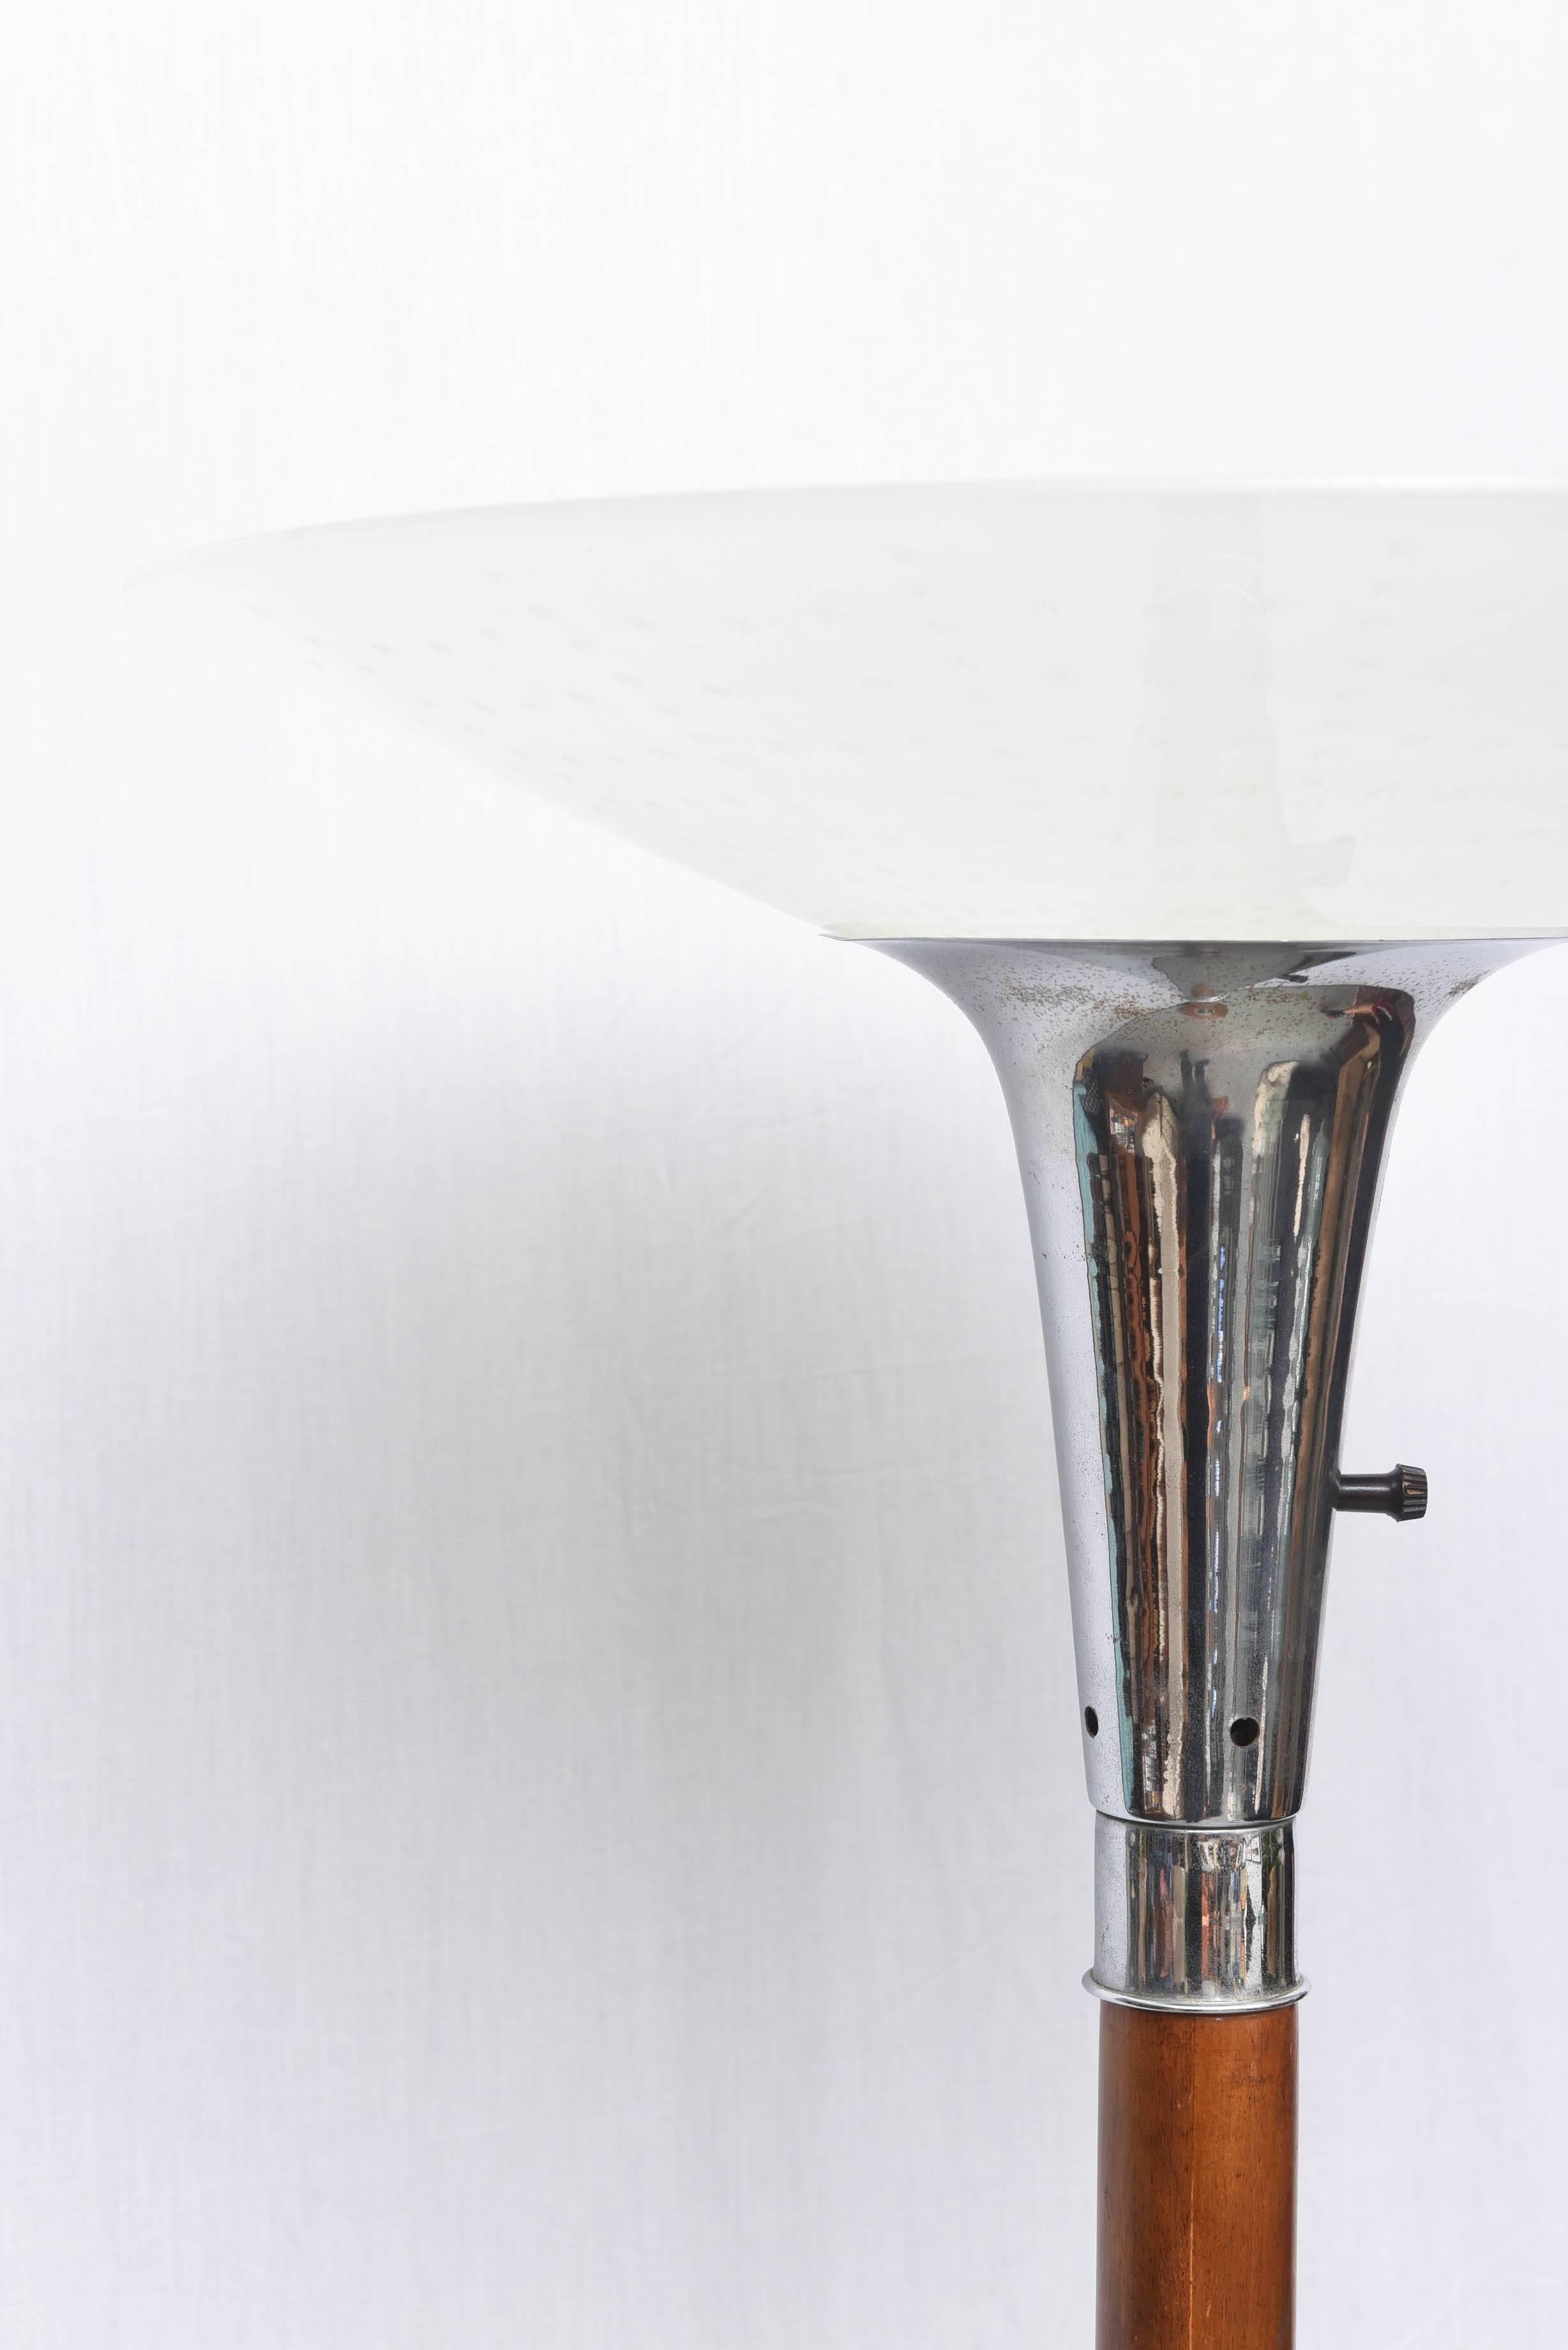 Mid-20th Century Lovely Wood, Chrome and Glass Floor Lamp or Torchiere, USA, 1940s